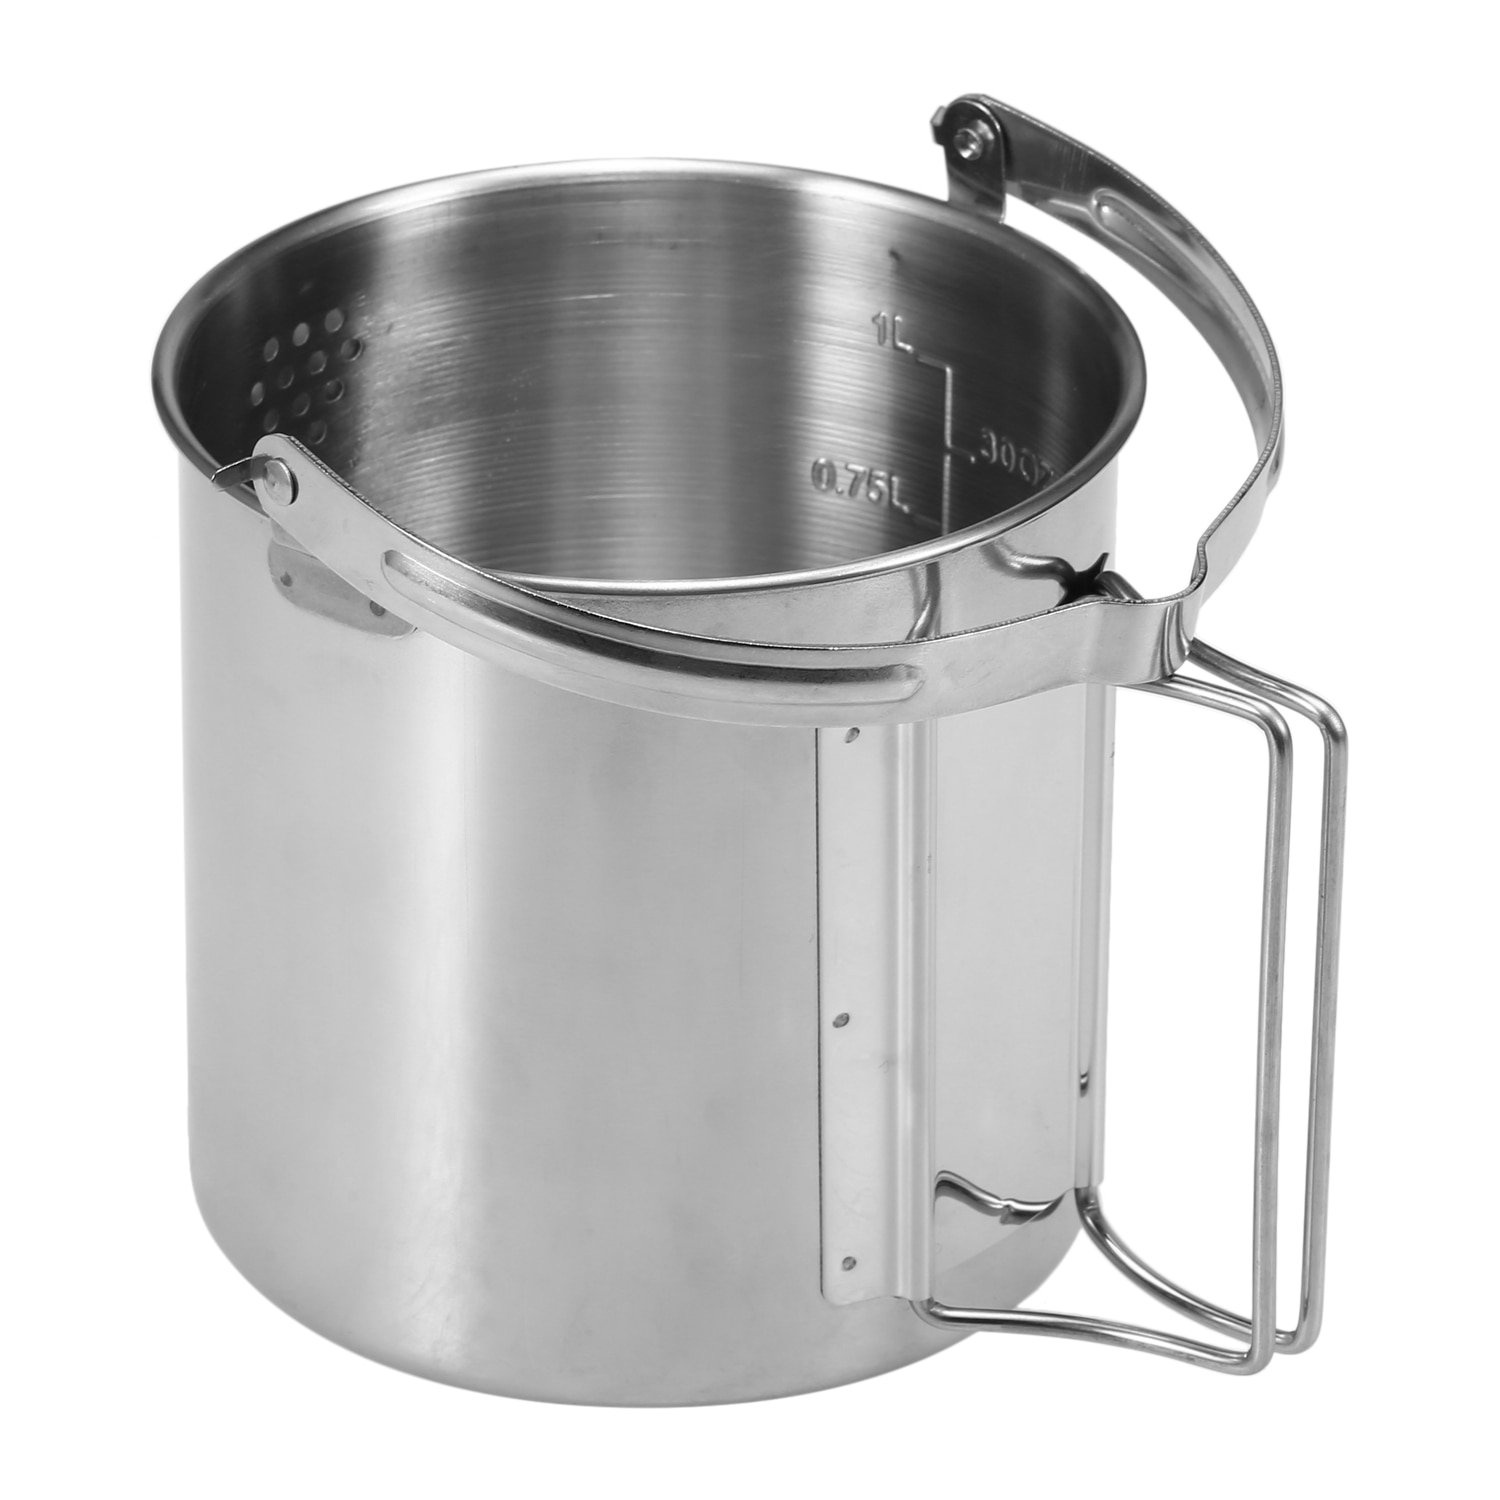 1L Kettle Stainless Steel Cooking Kettle Portable Outdoor Camping Backpacking Pot with Foldable Handle Camping Equipment